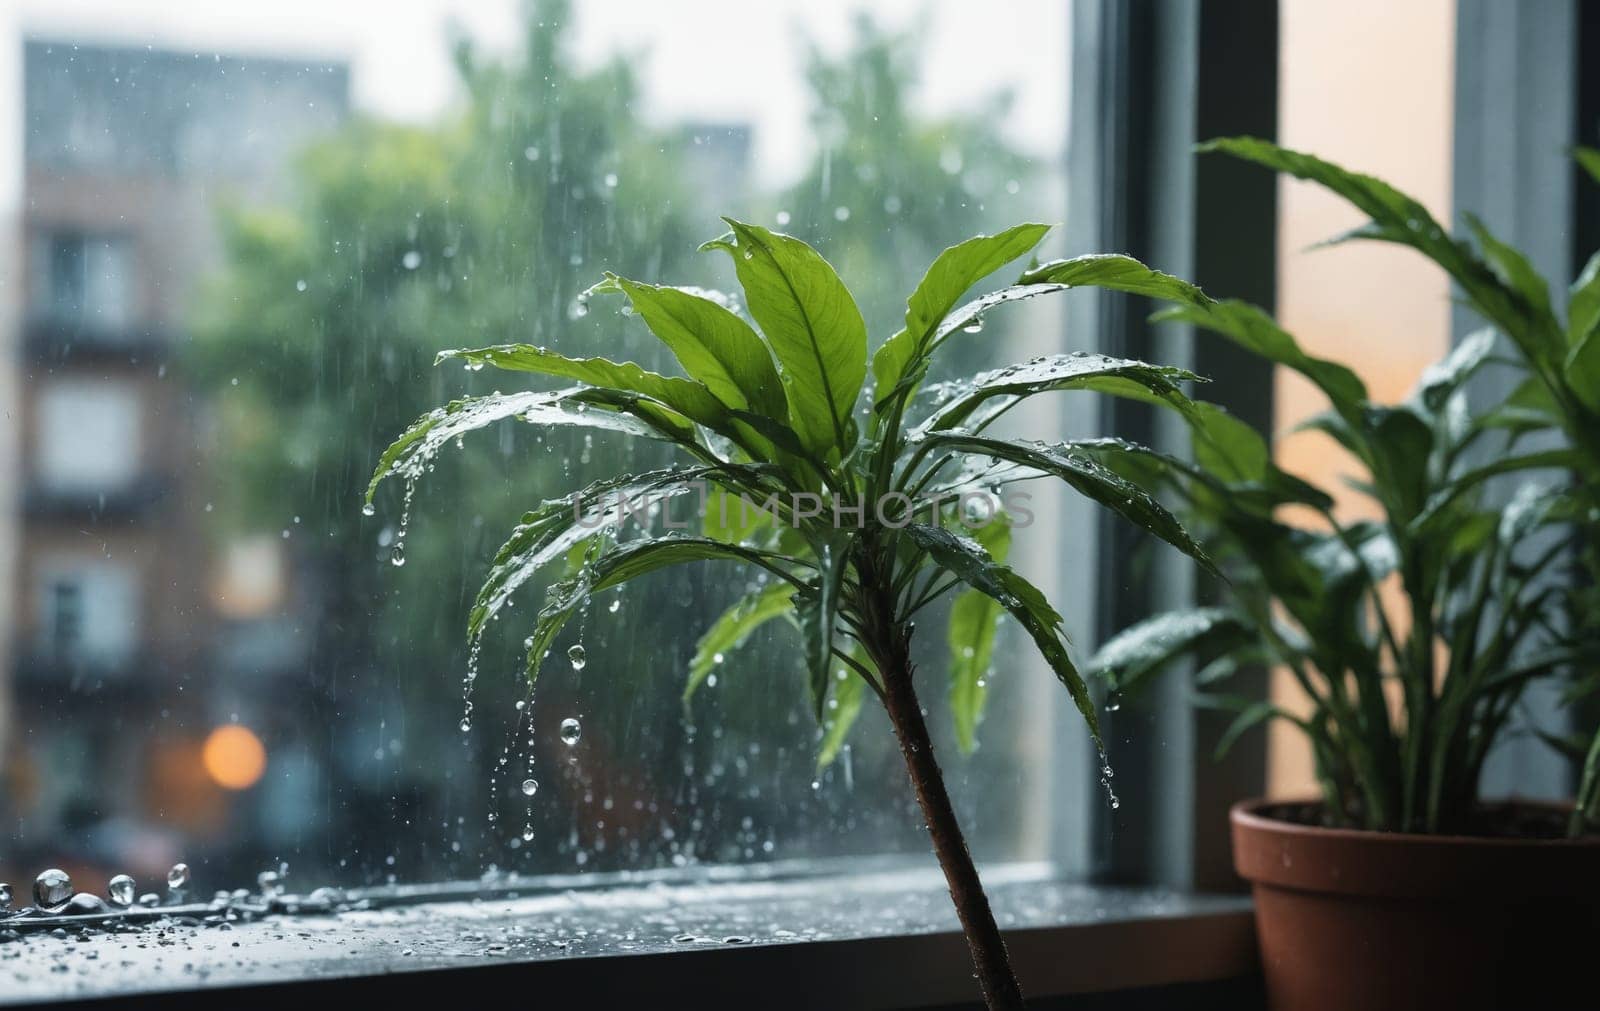 Tranquility Captured: Indoor Plant by Rain-Kissed Window by Andre1ns